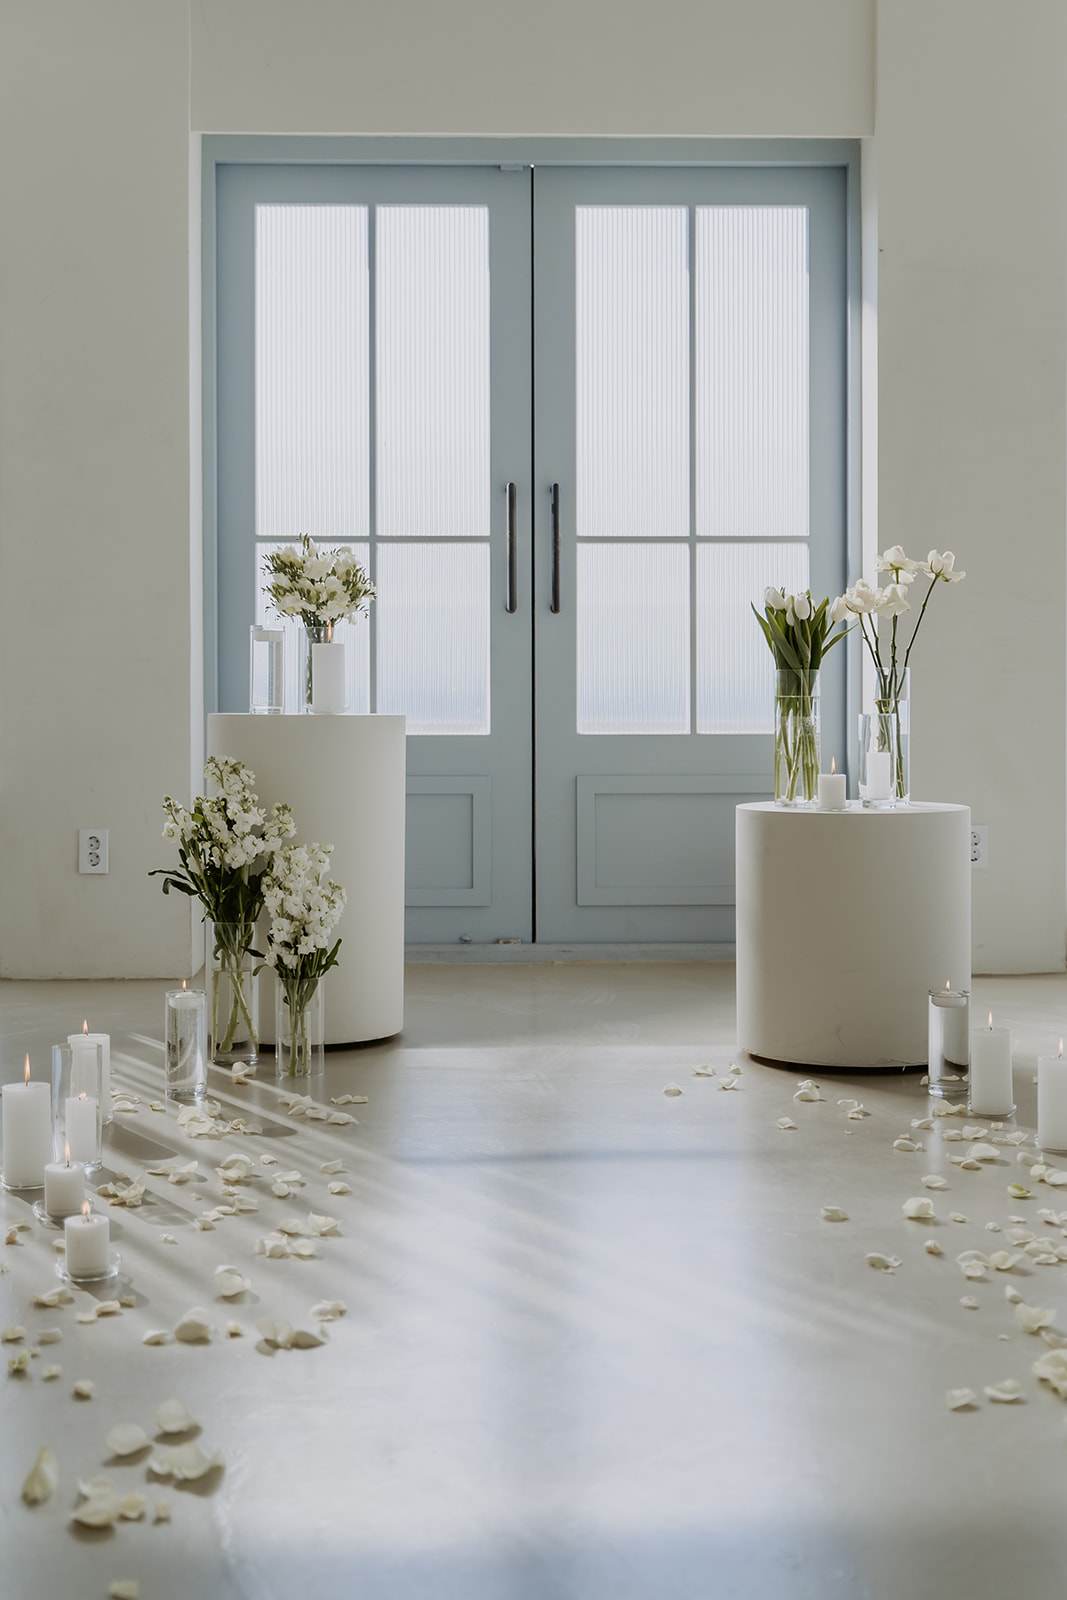 A serene room with a pair of french doors, white flowers in vases, scattered petals, and lit candles.